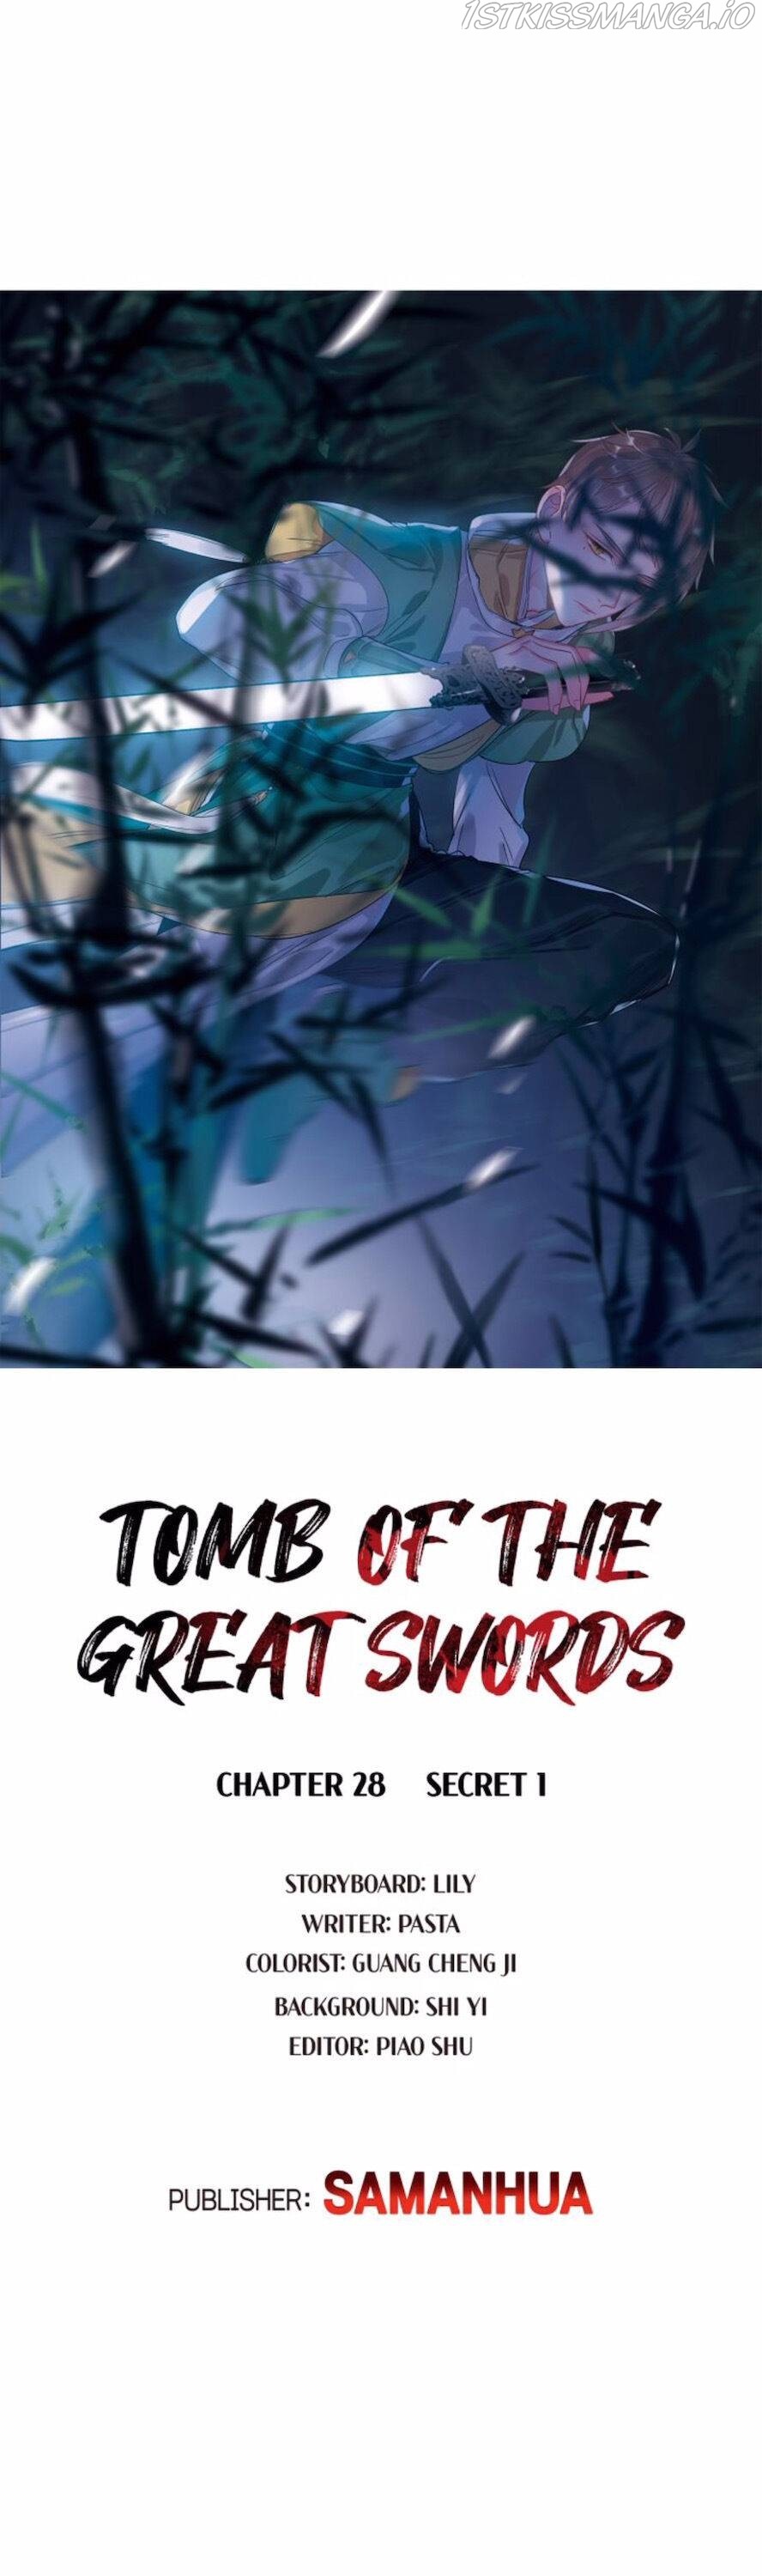 The Tomb Of Famed Swords - Page 1